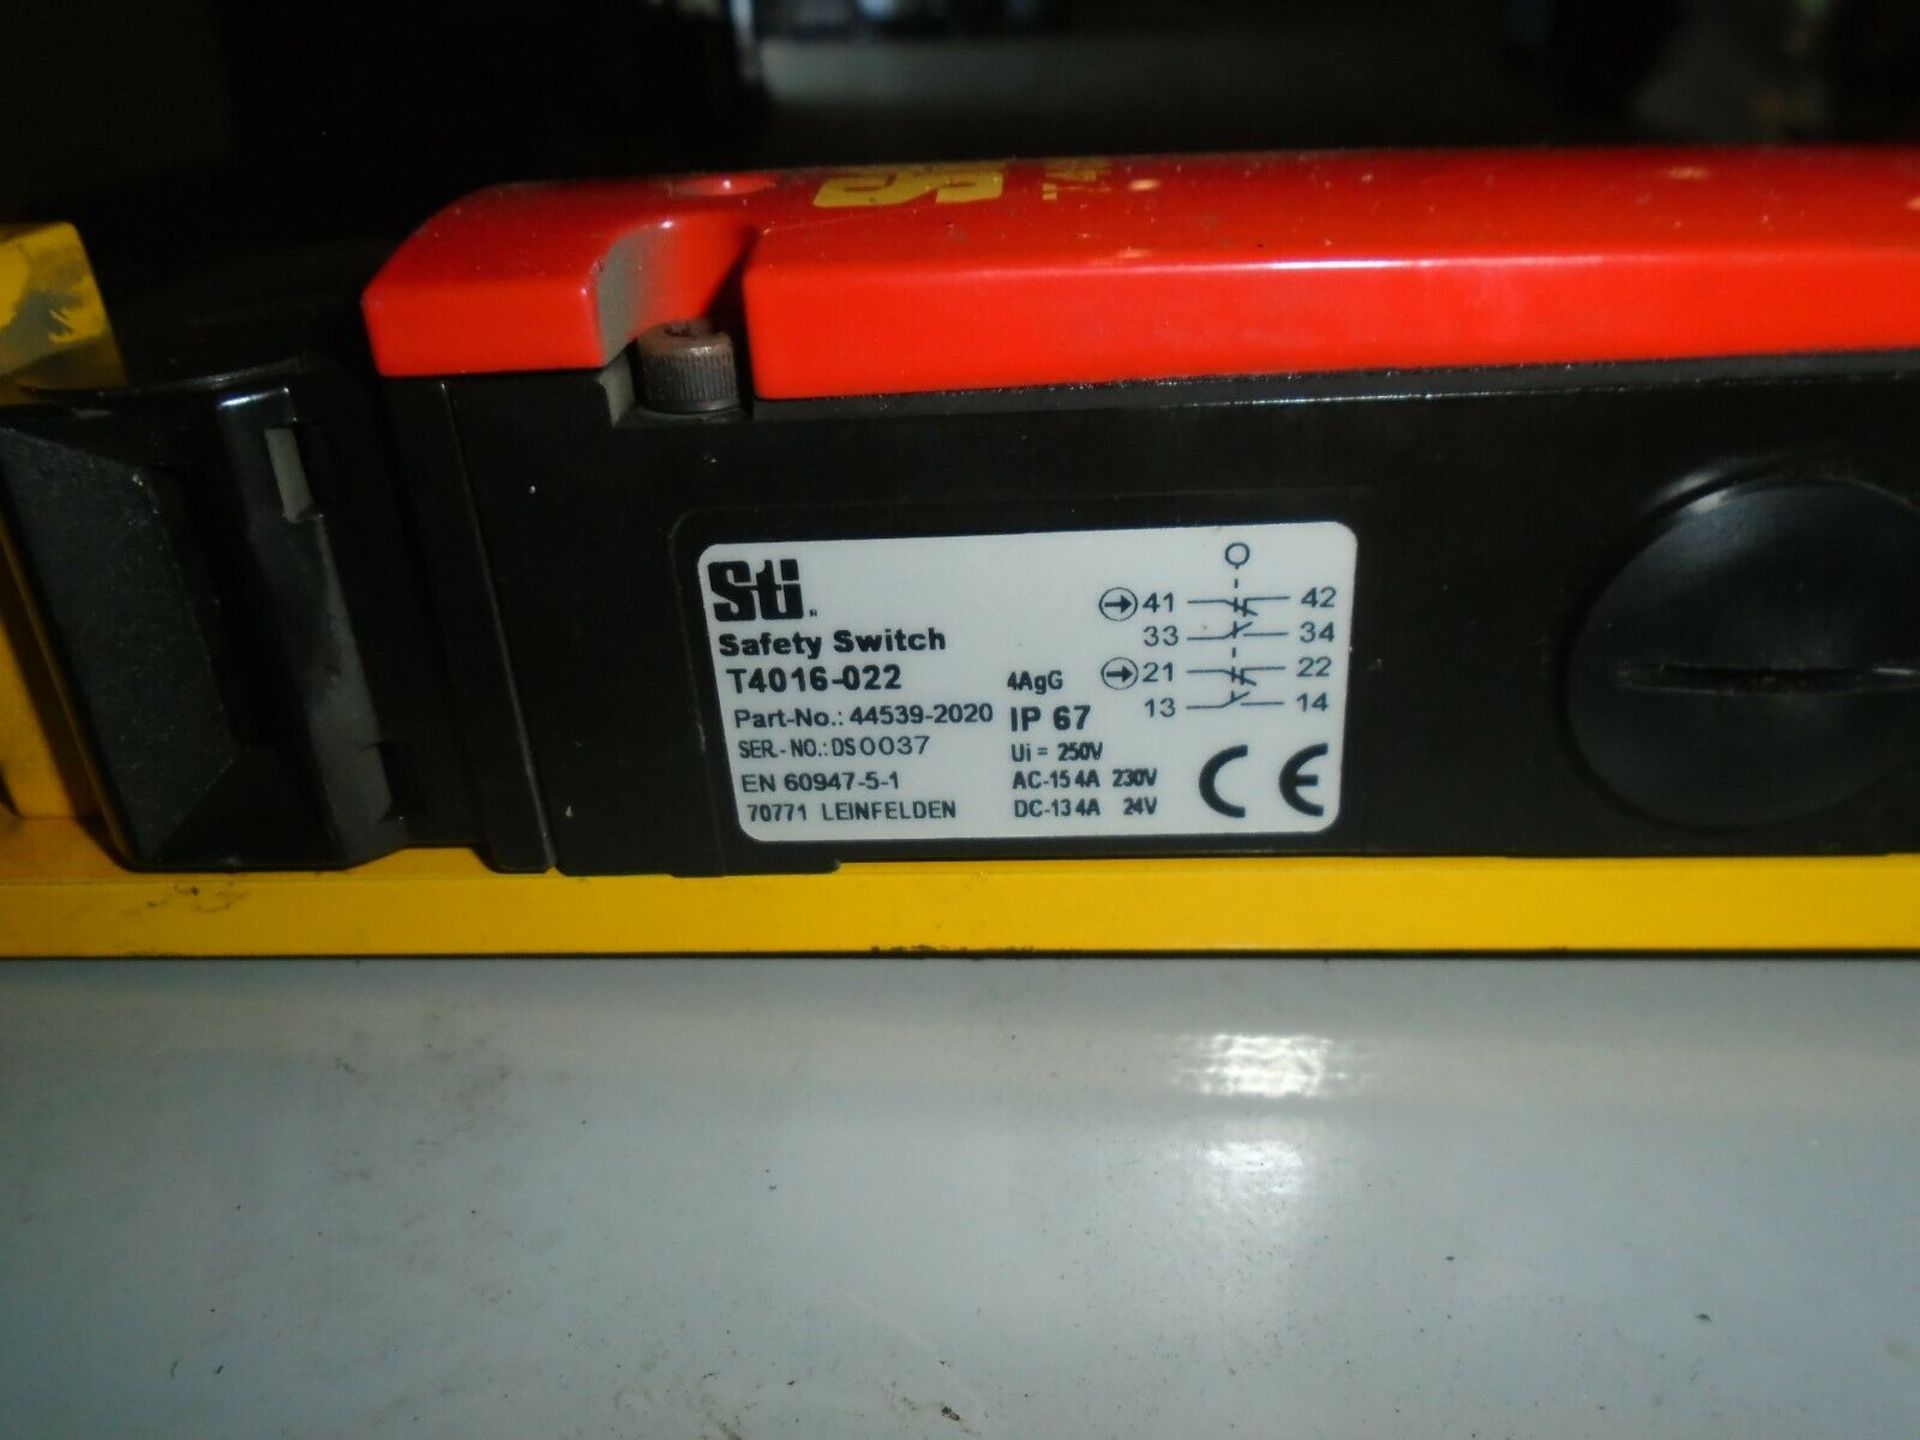 STI Light Curtin Safety Switch T4016-022 With Control - Image 3 of 5